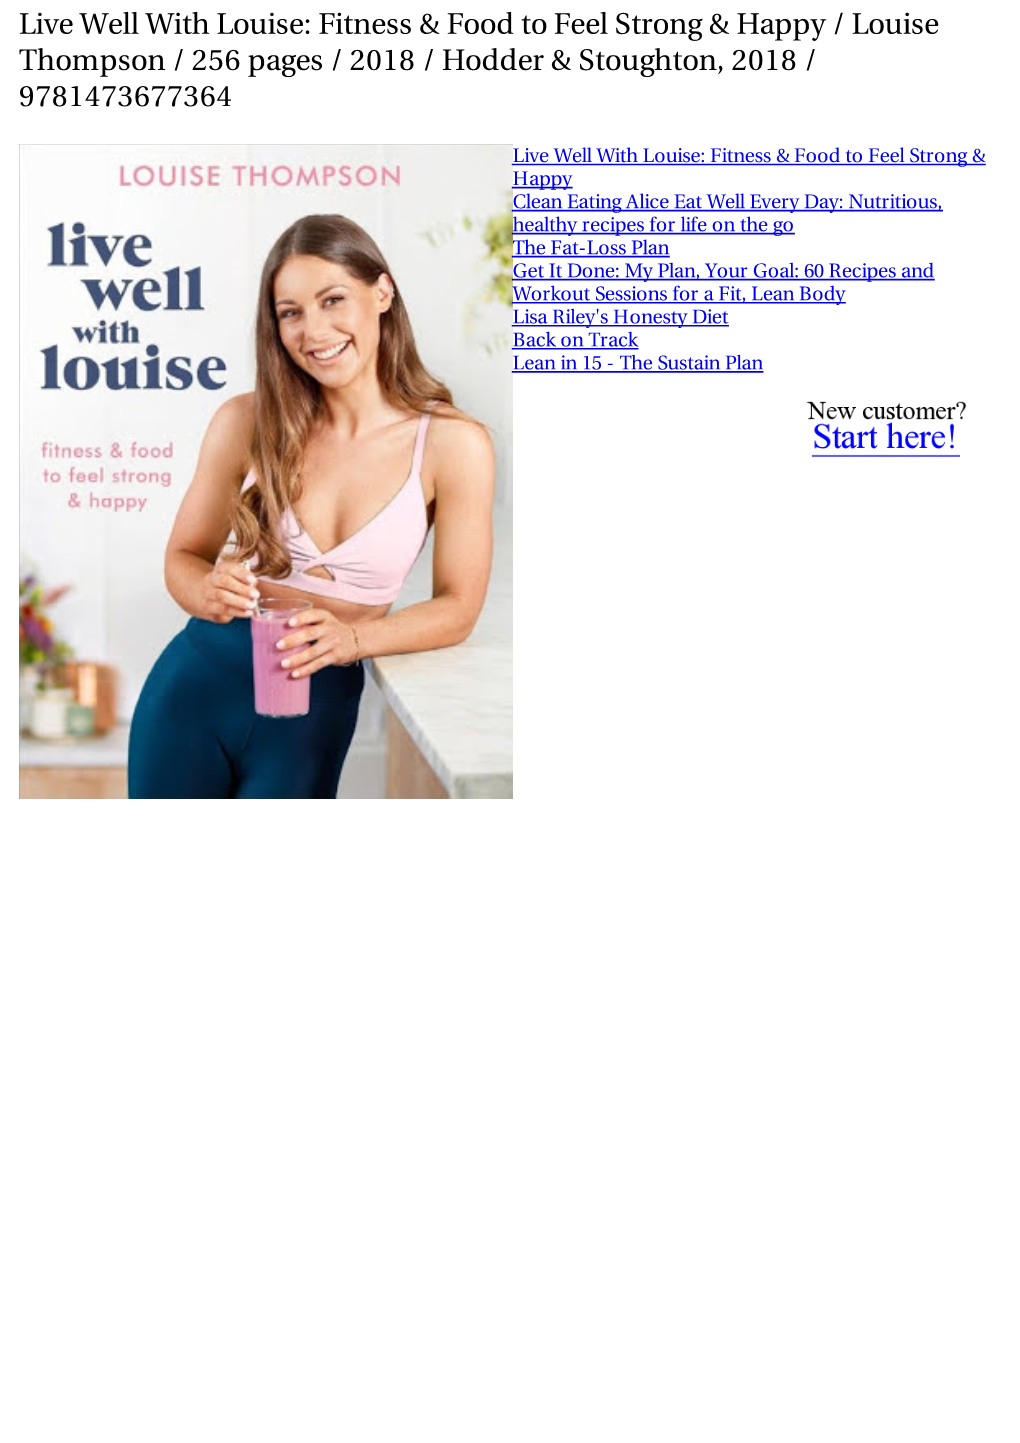 Live Well with Louise: Fitness & Food to Feel Strong & Happy / Louise